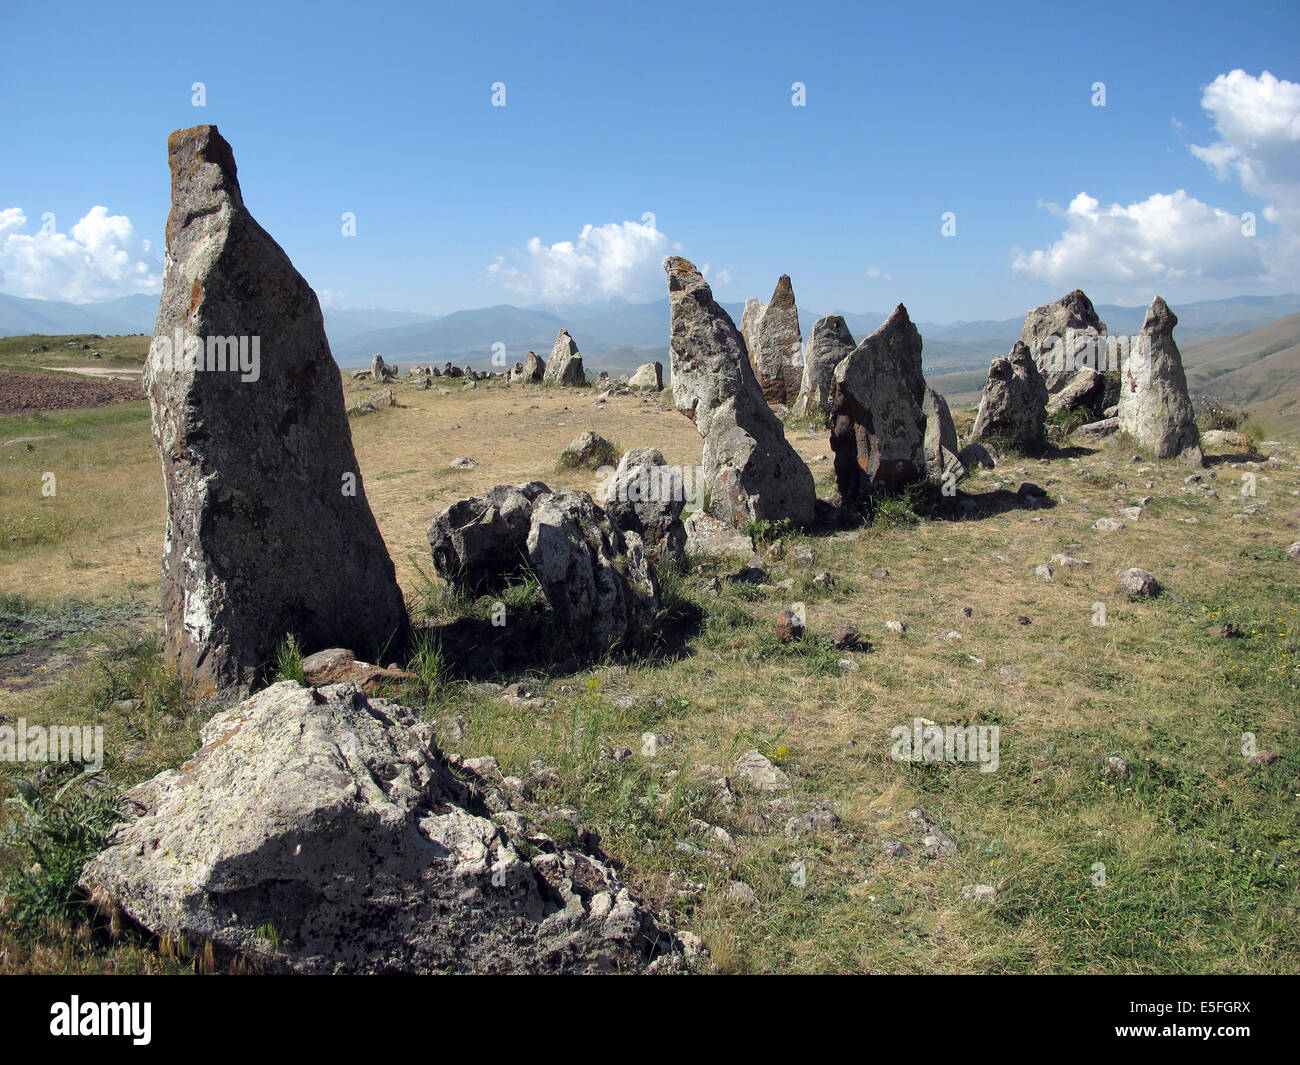 Sisian, Armenia. 27th June, 2014. Megaliths are seen at the prehistoric archaeological site Zorats Karer near Sisian, Armenia, 27 June 2014. The site served as a necropolis from the Middle Bronze Age to the Iron Age. Photo: Jens Kalaene -NO WIRE SERVICE-/dpa/Alamy Live News Stock Photo